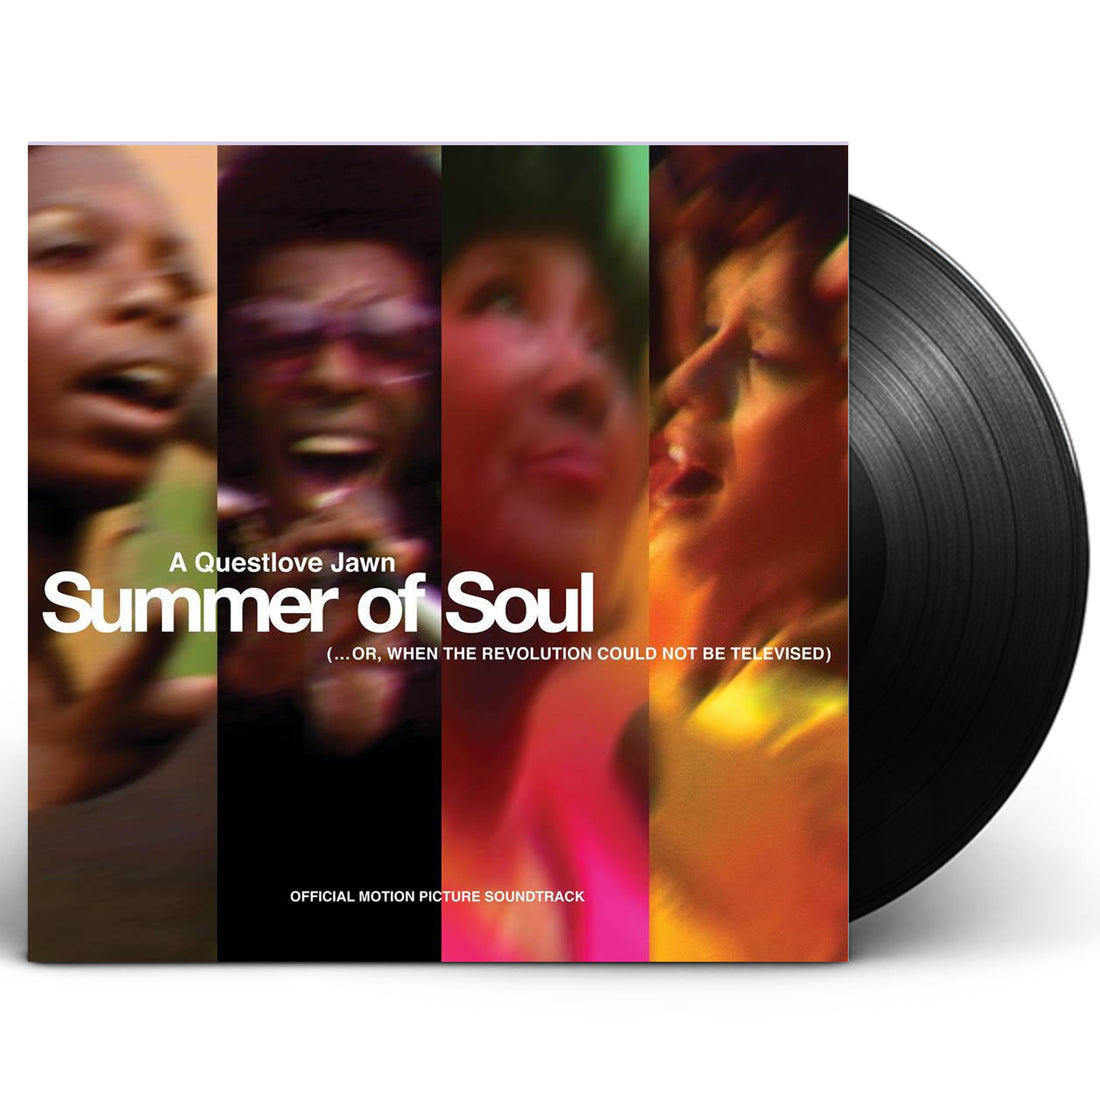 Summer Of Soul (...Or, When The Revolution Could Not Be Televised) Original Motion Picture Soundtrack 2xLP Vinyl 